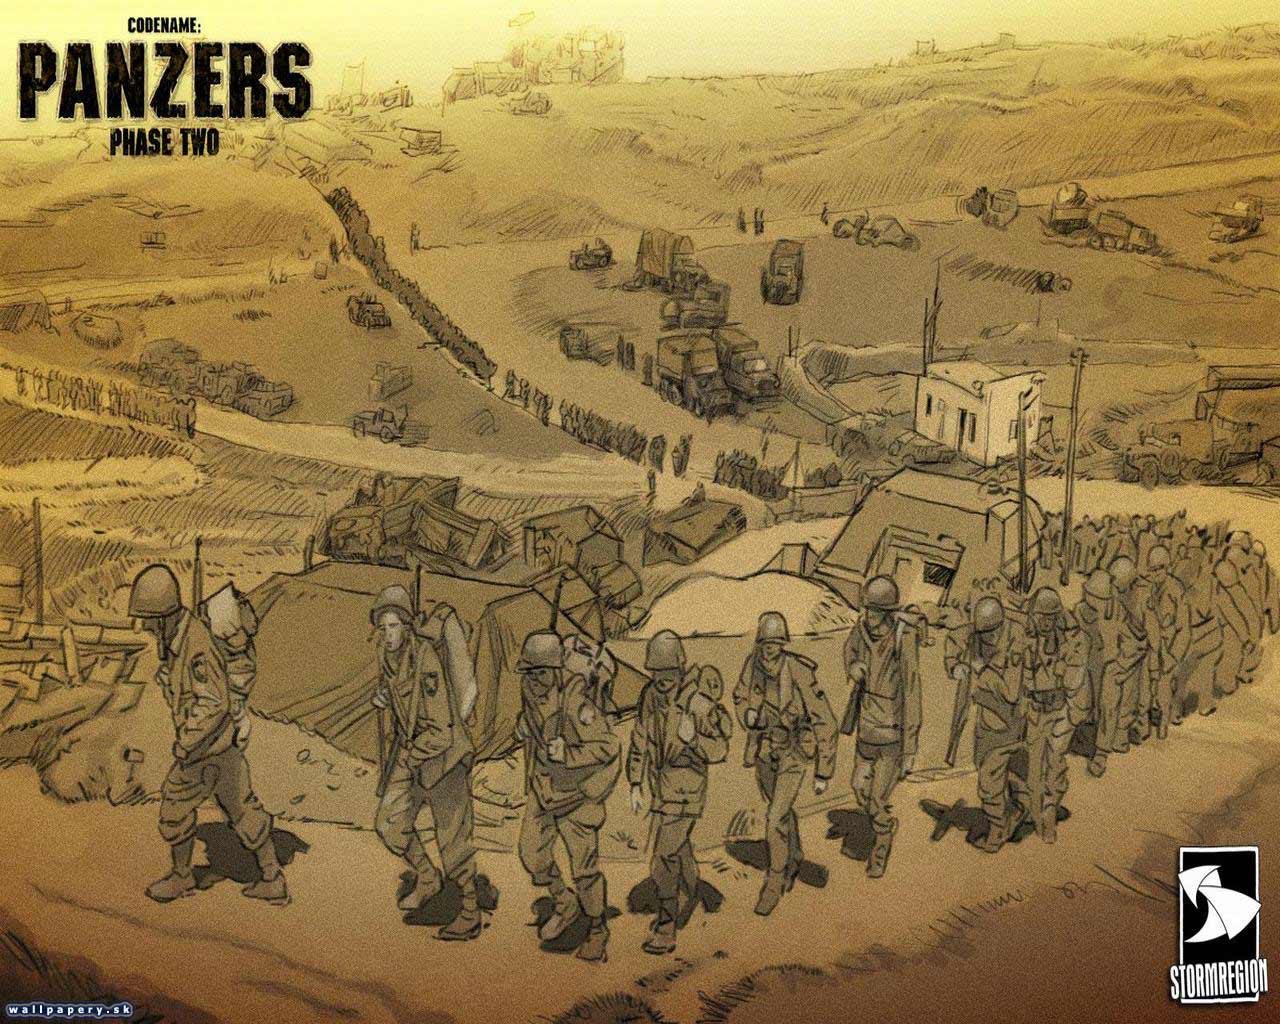 Codename: Panzers Phase Two - wallpaper 5